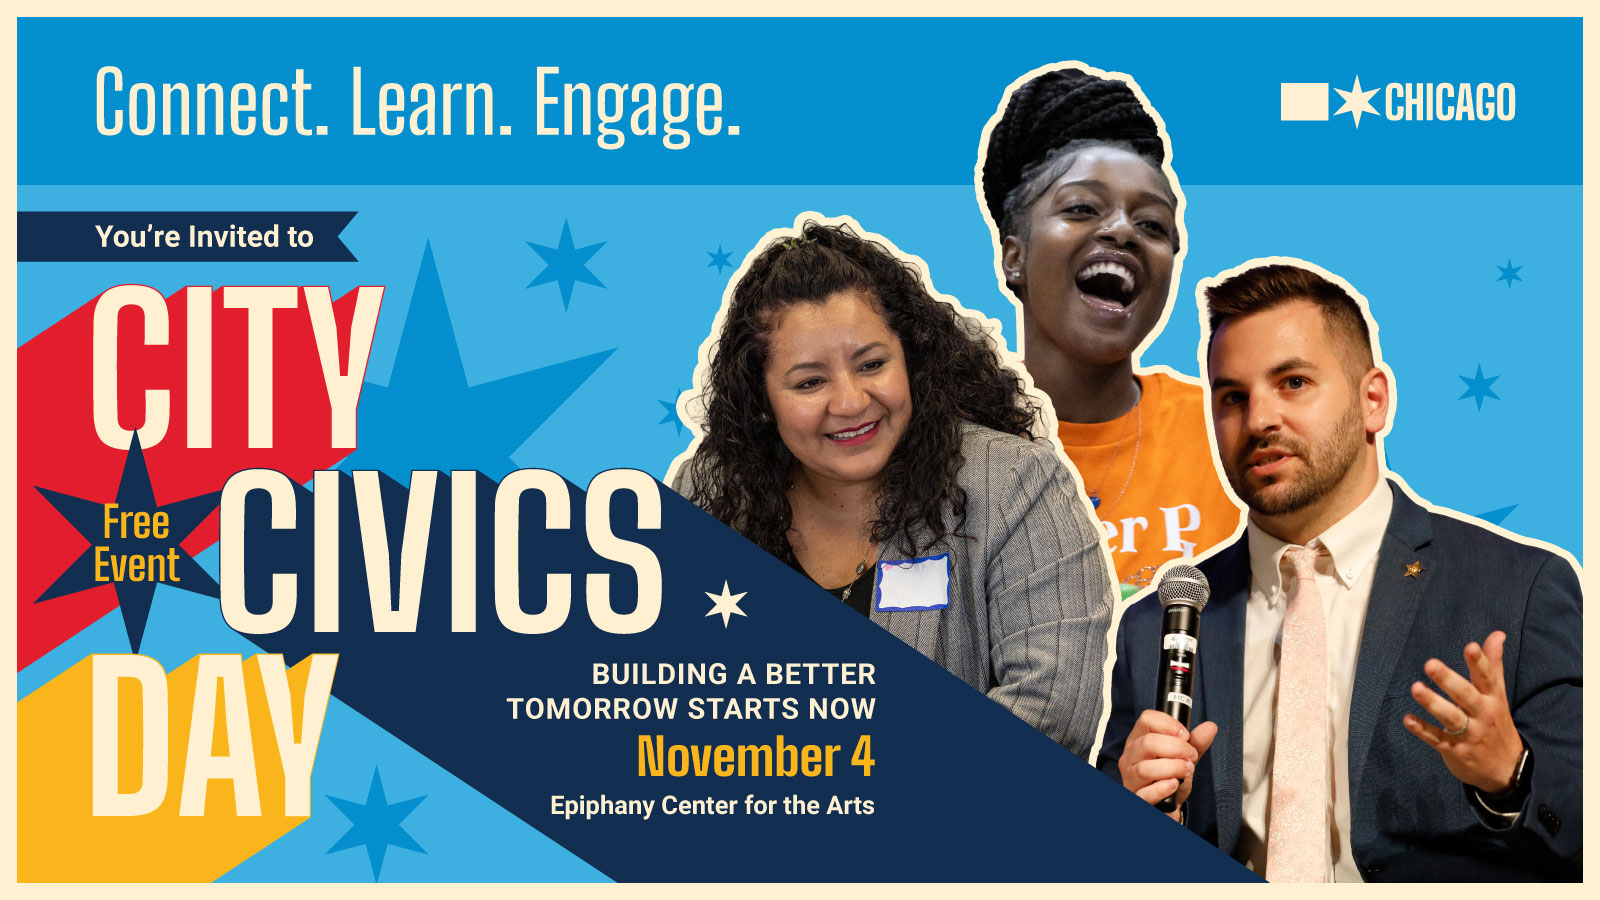 City Civics Day - Connect. Learn. Engage. - Free Event - November 4 - Epiphany Center for the Arts